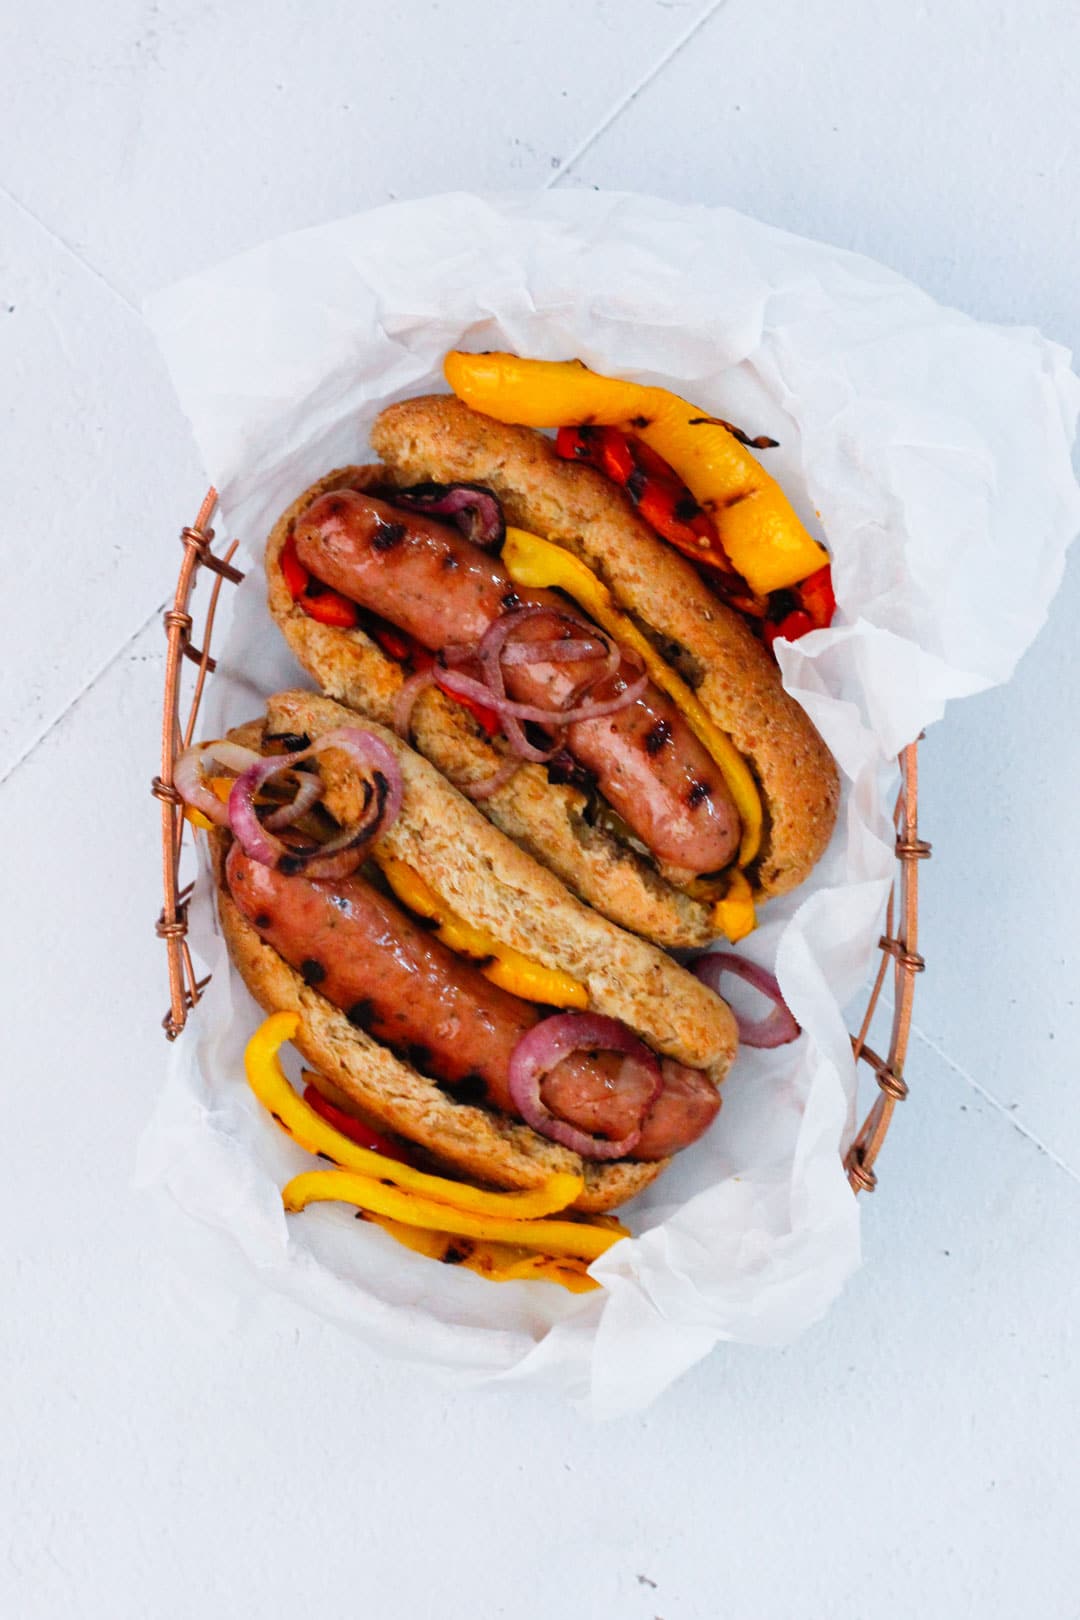 Grilled Bratwursts with Caramelized Onions and Peppers